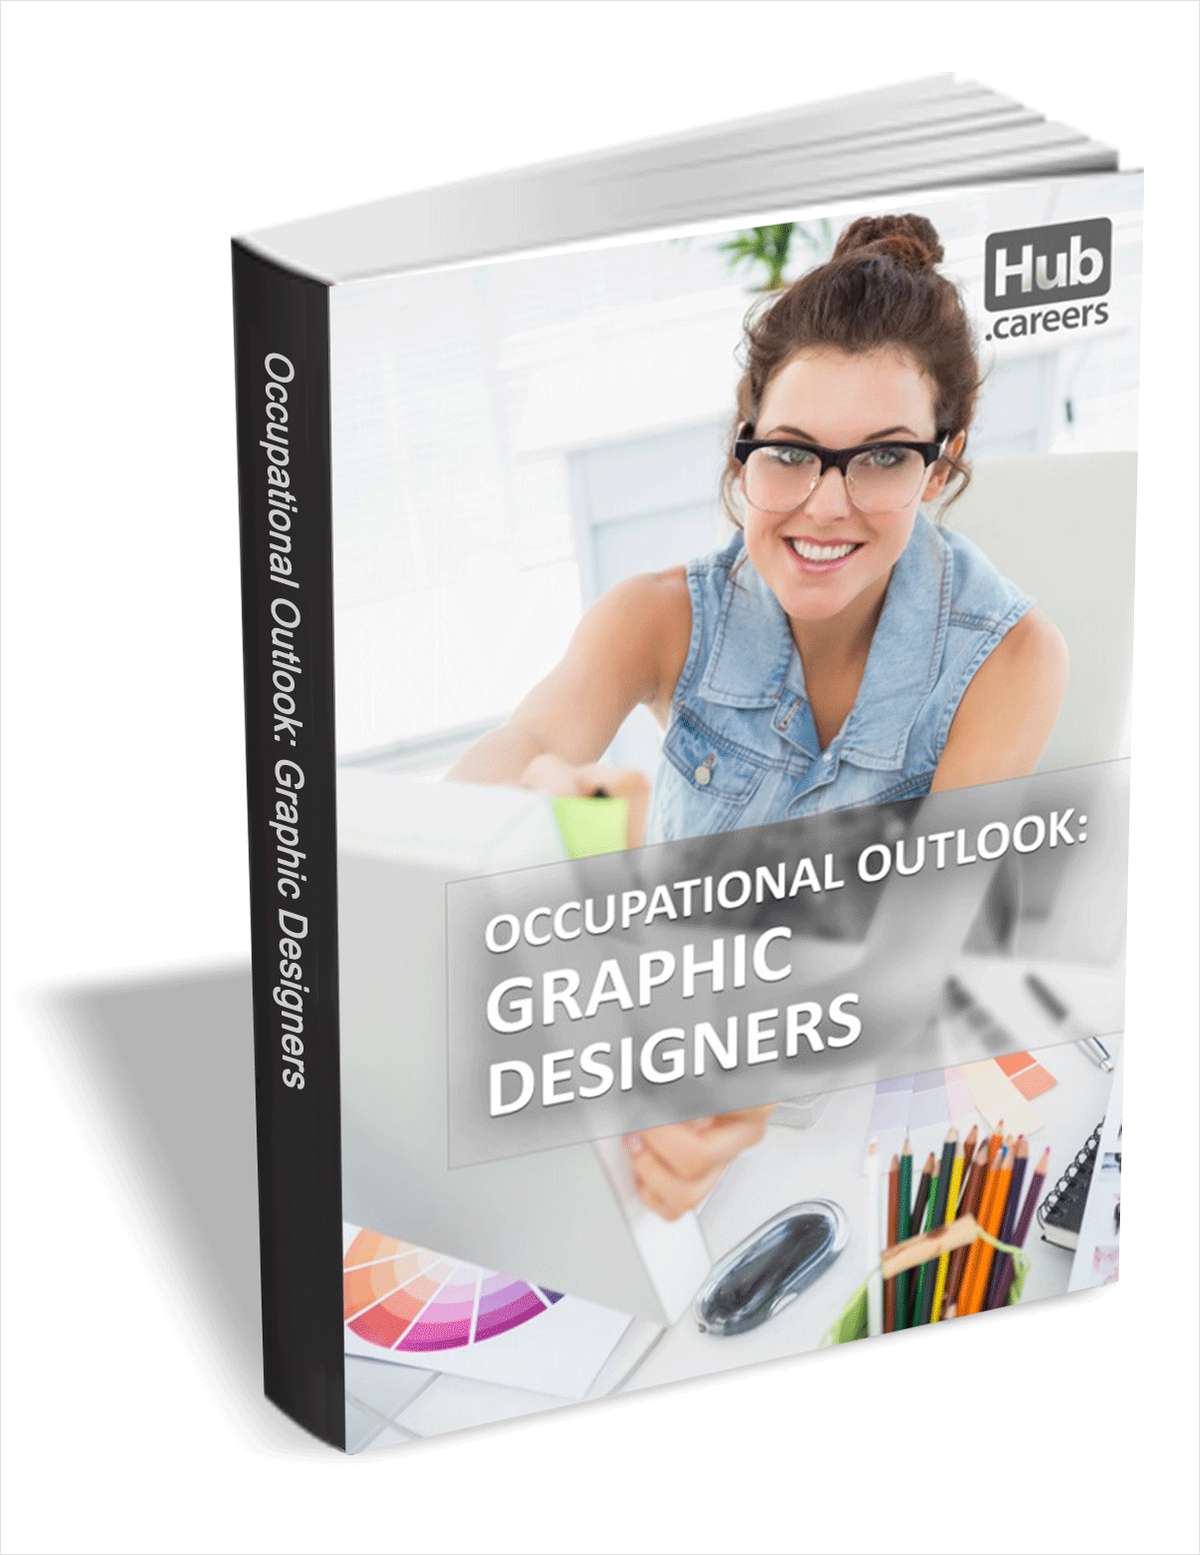 Graphic Designers - Occupational Outlook